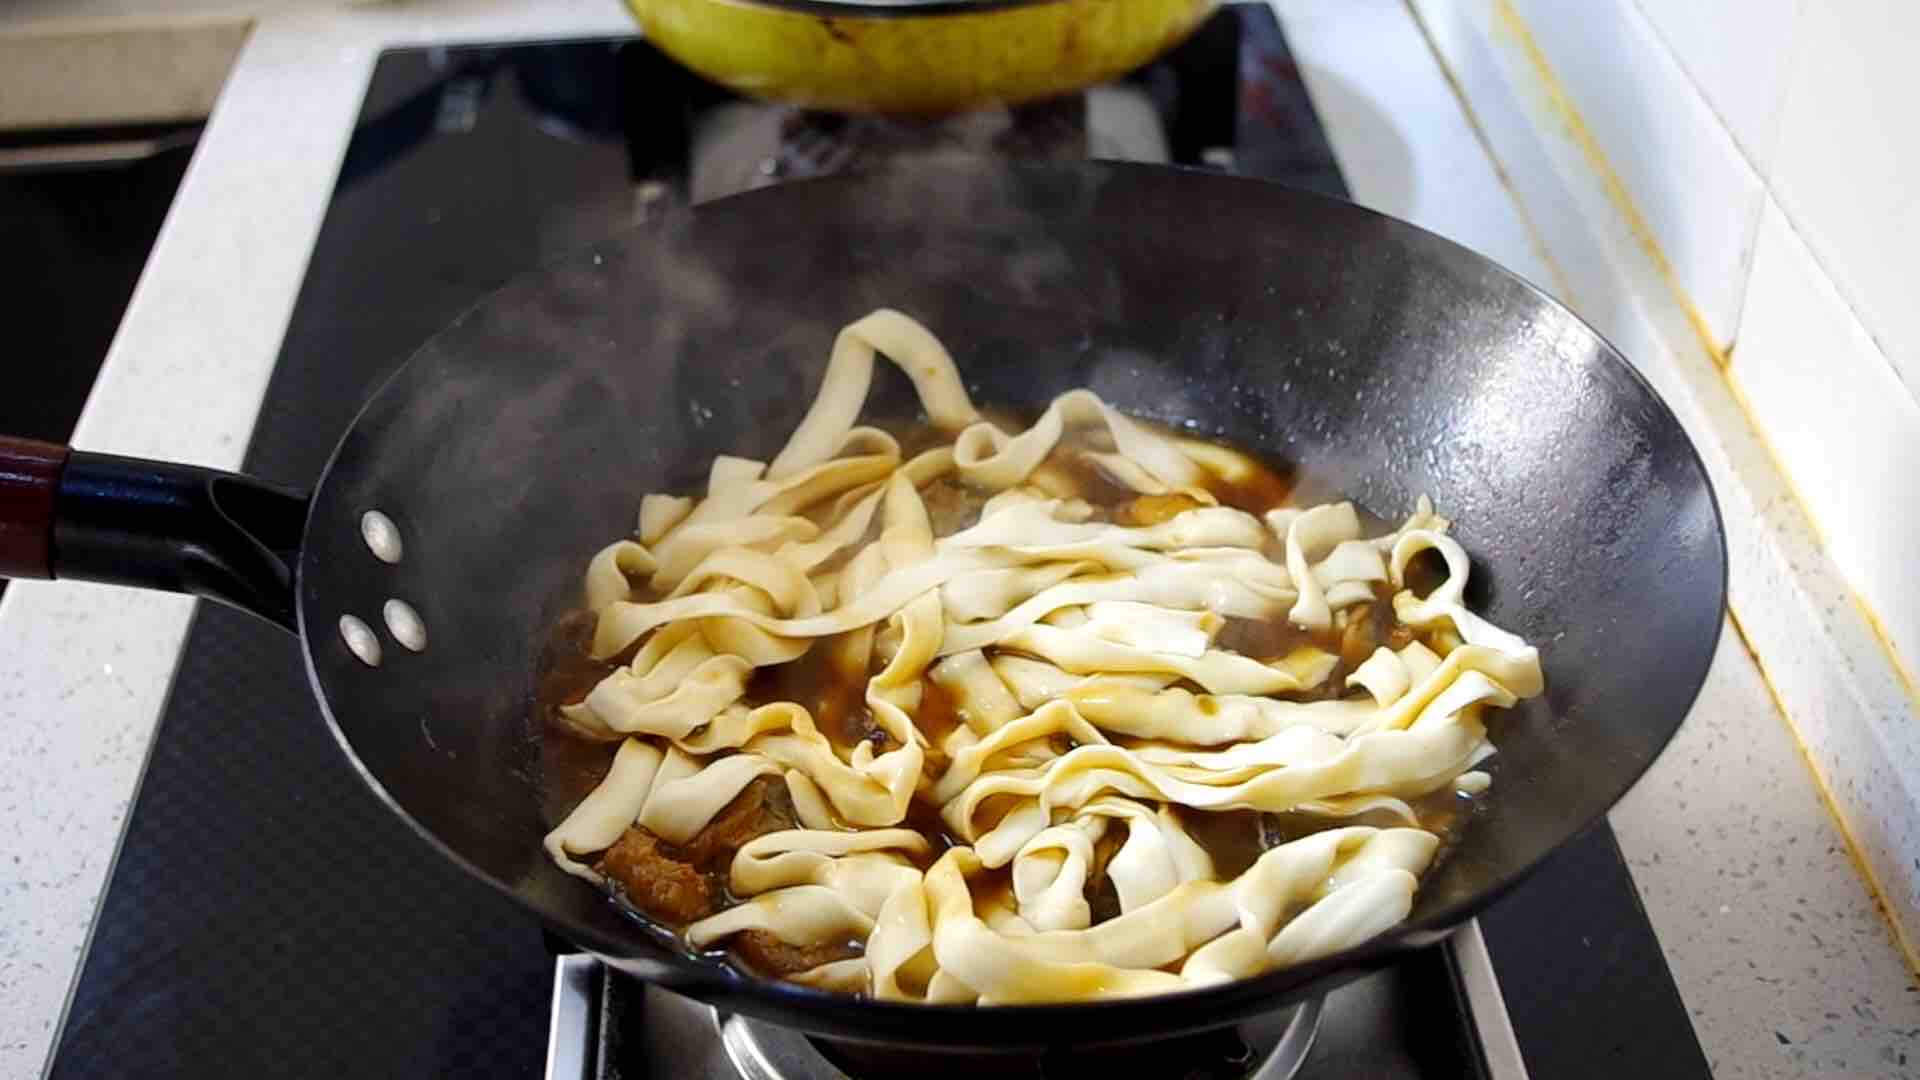 Food in One Pot: Braised Noodles with Small Mackerel Fish recipe